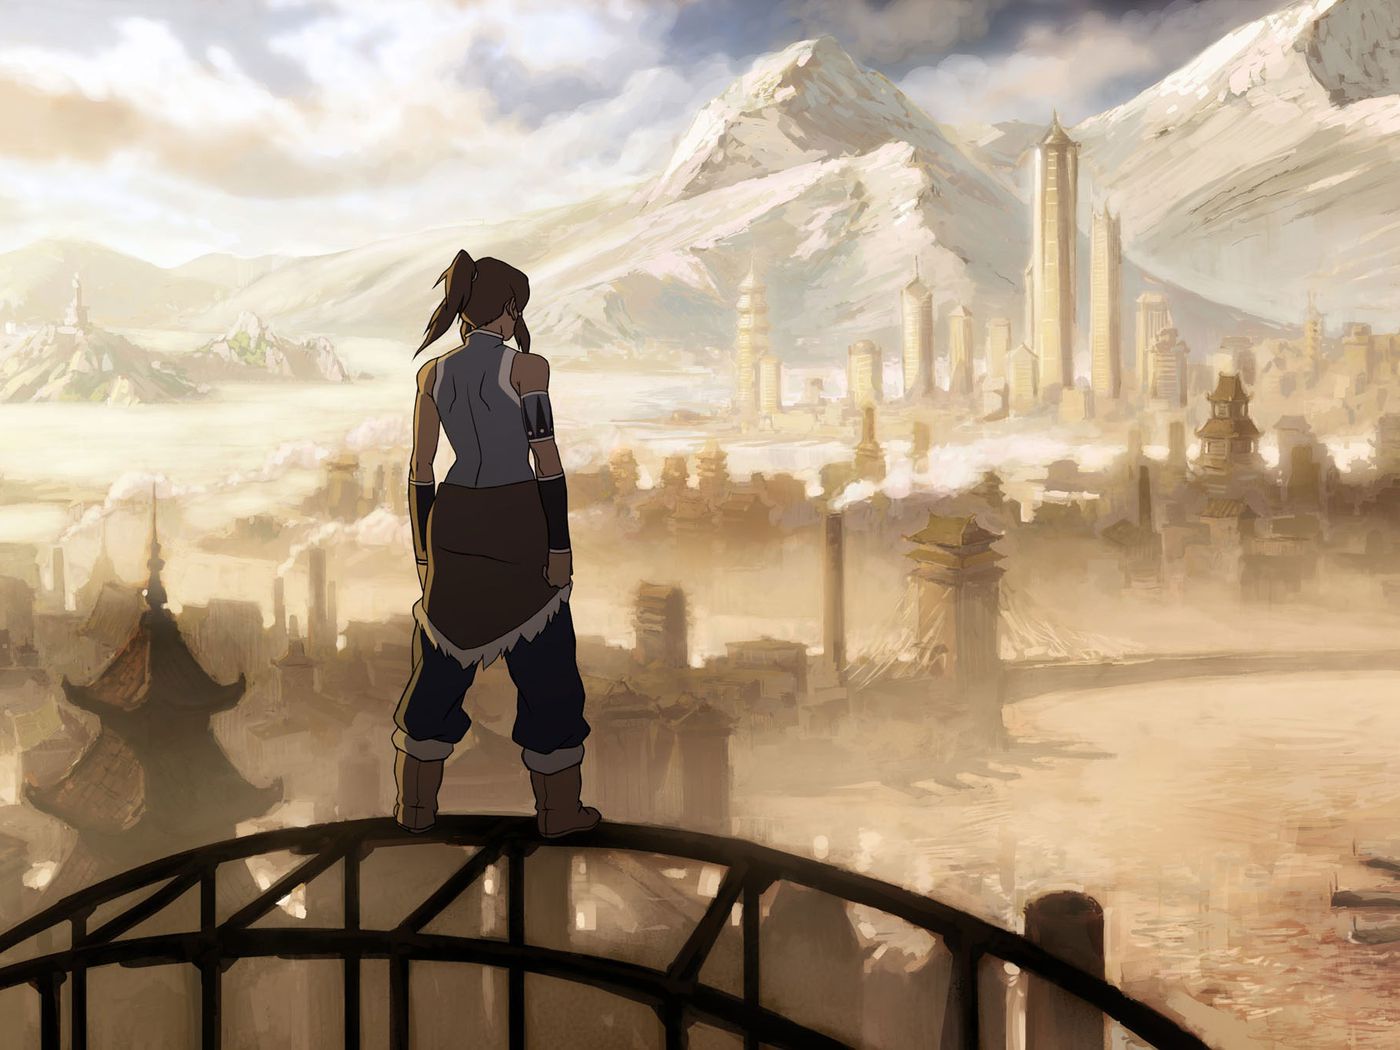 Legend of Korra is on Netflix: A look at its messy, complicated legacy - Vox